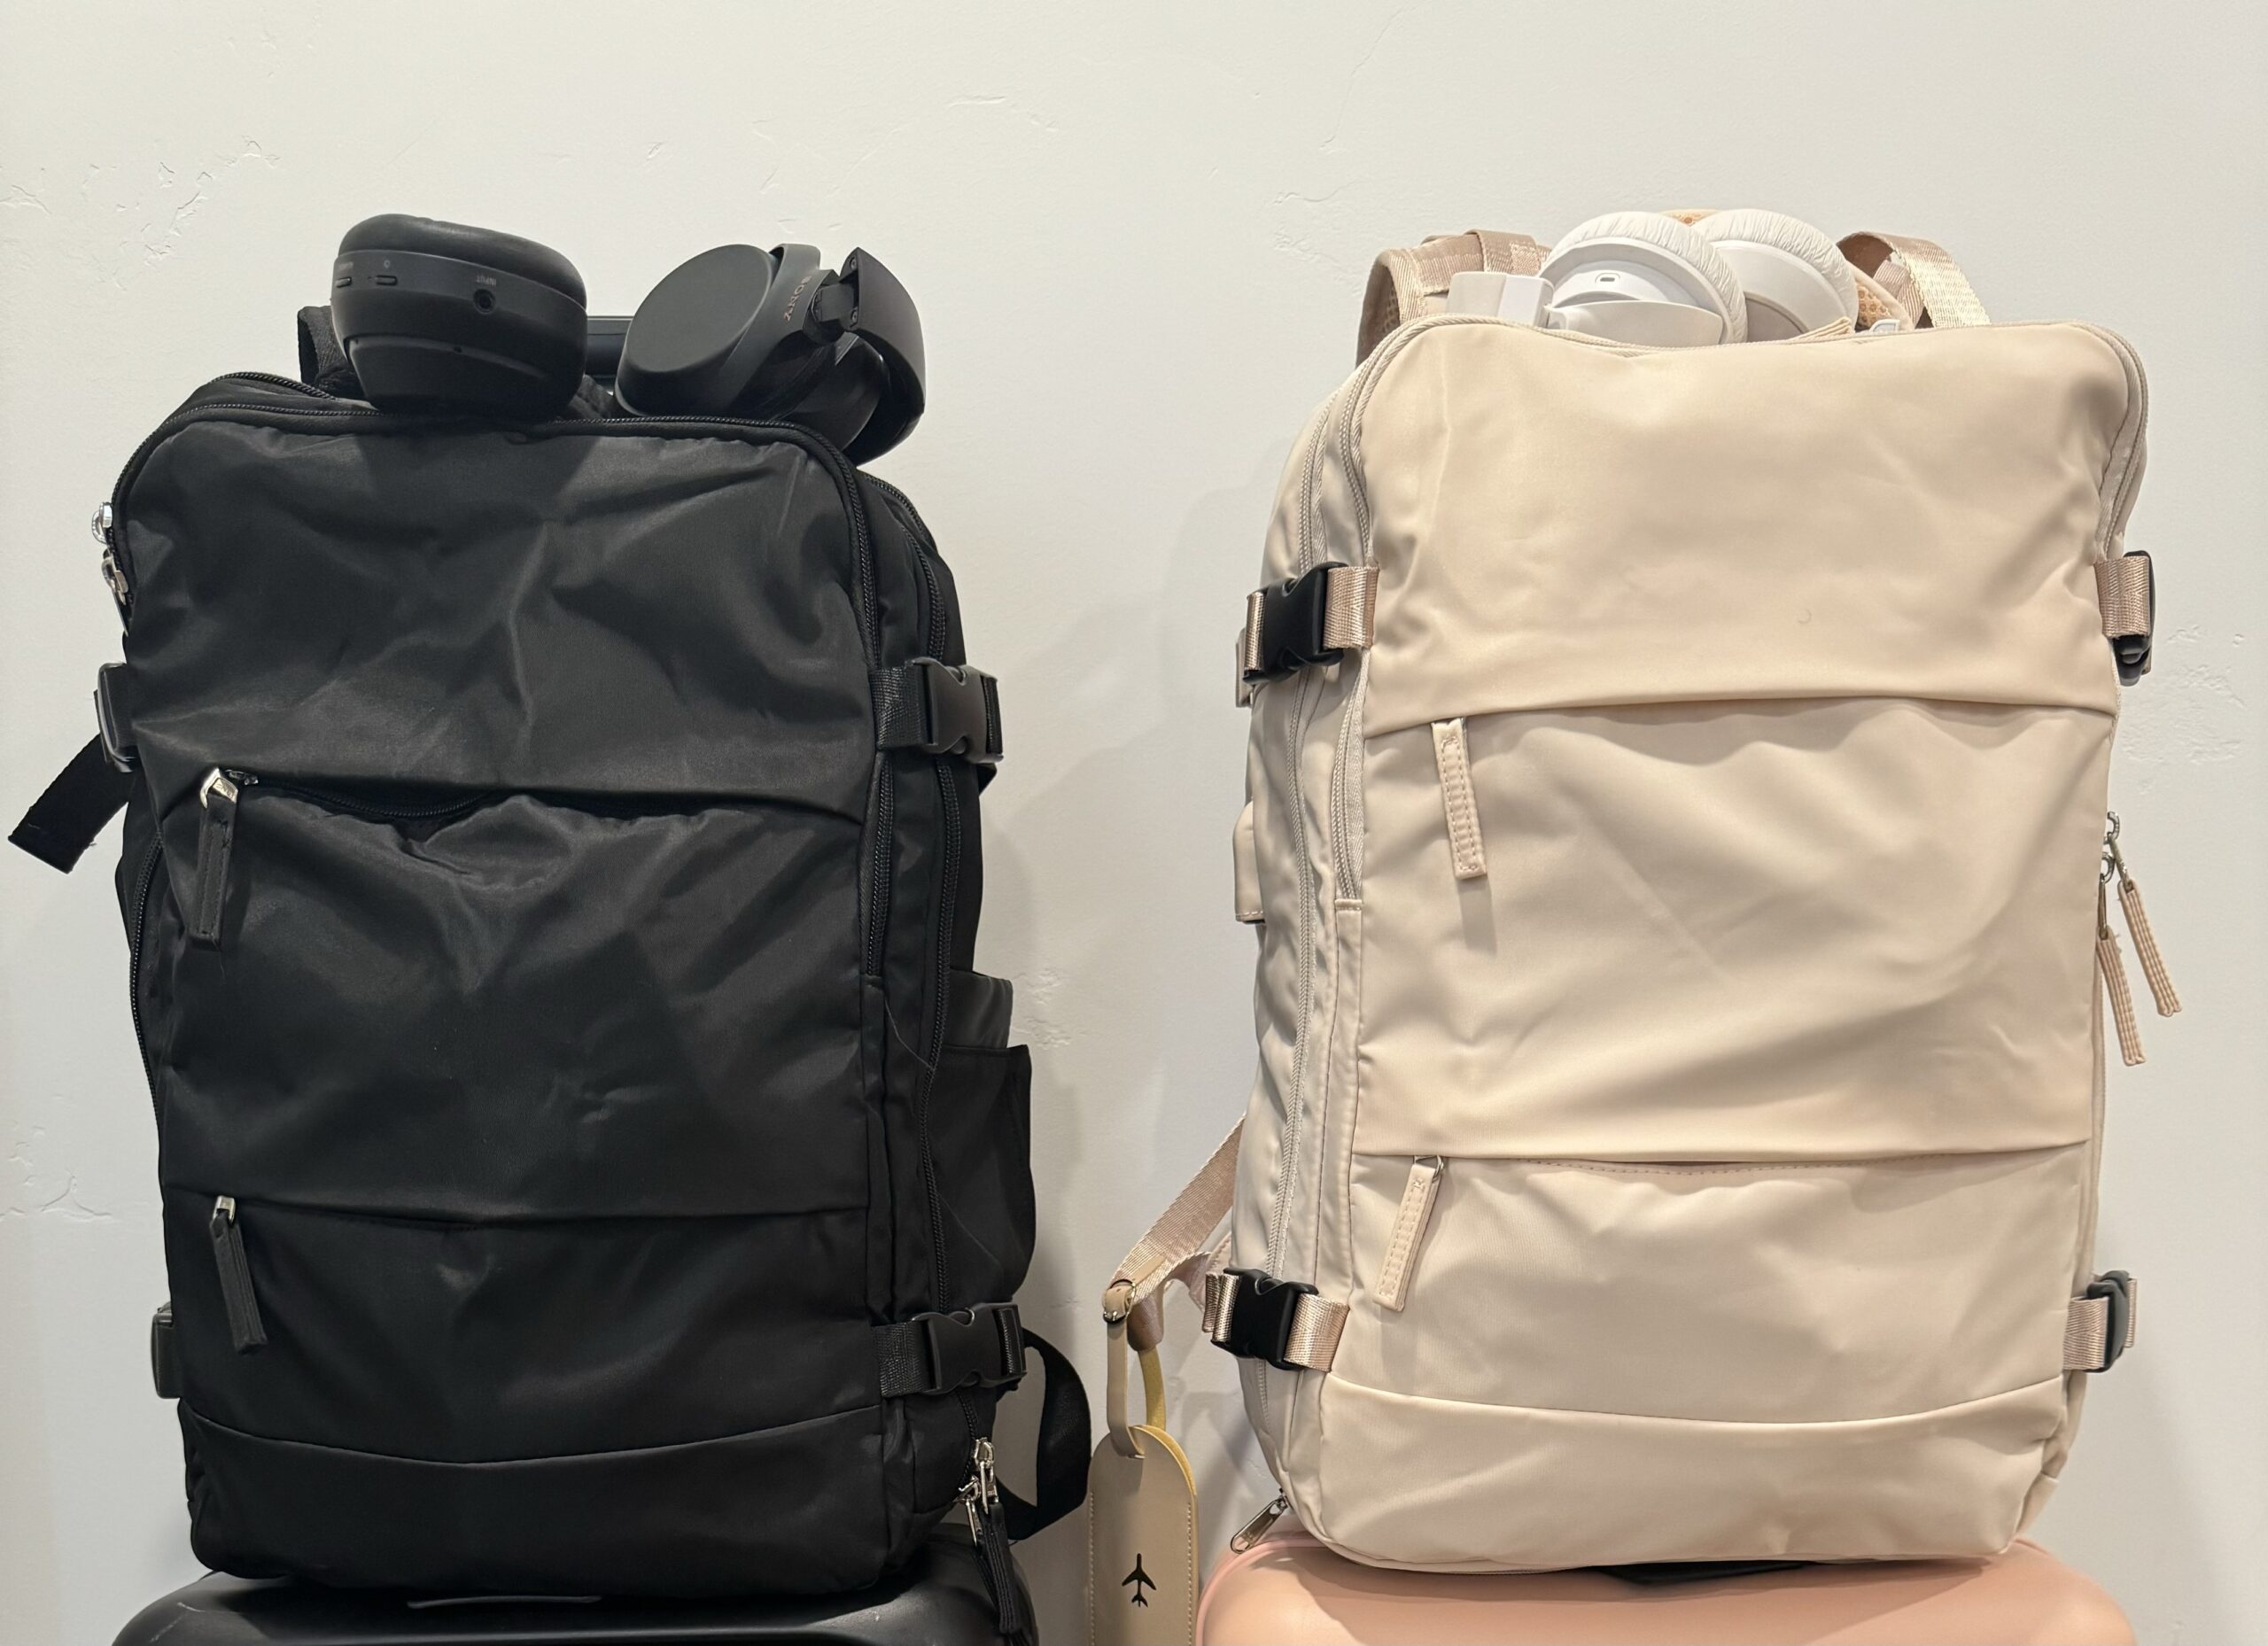 The Coofay Backpack – Your Perfect Travel Companion